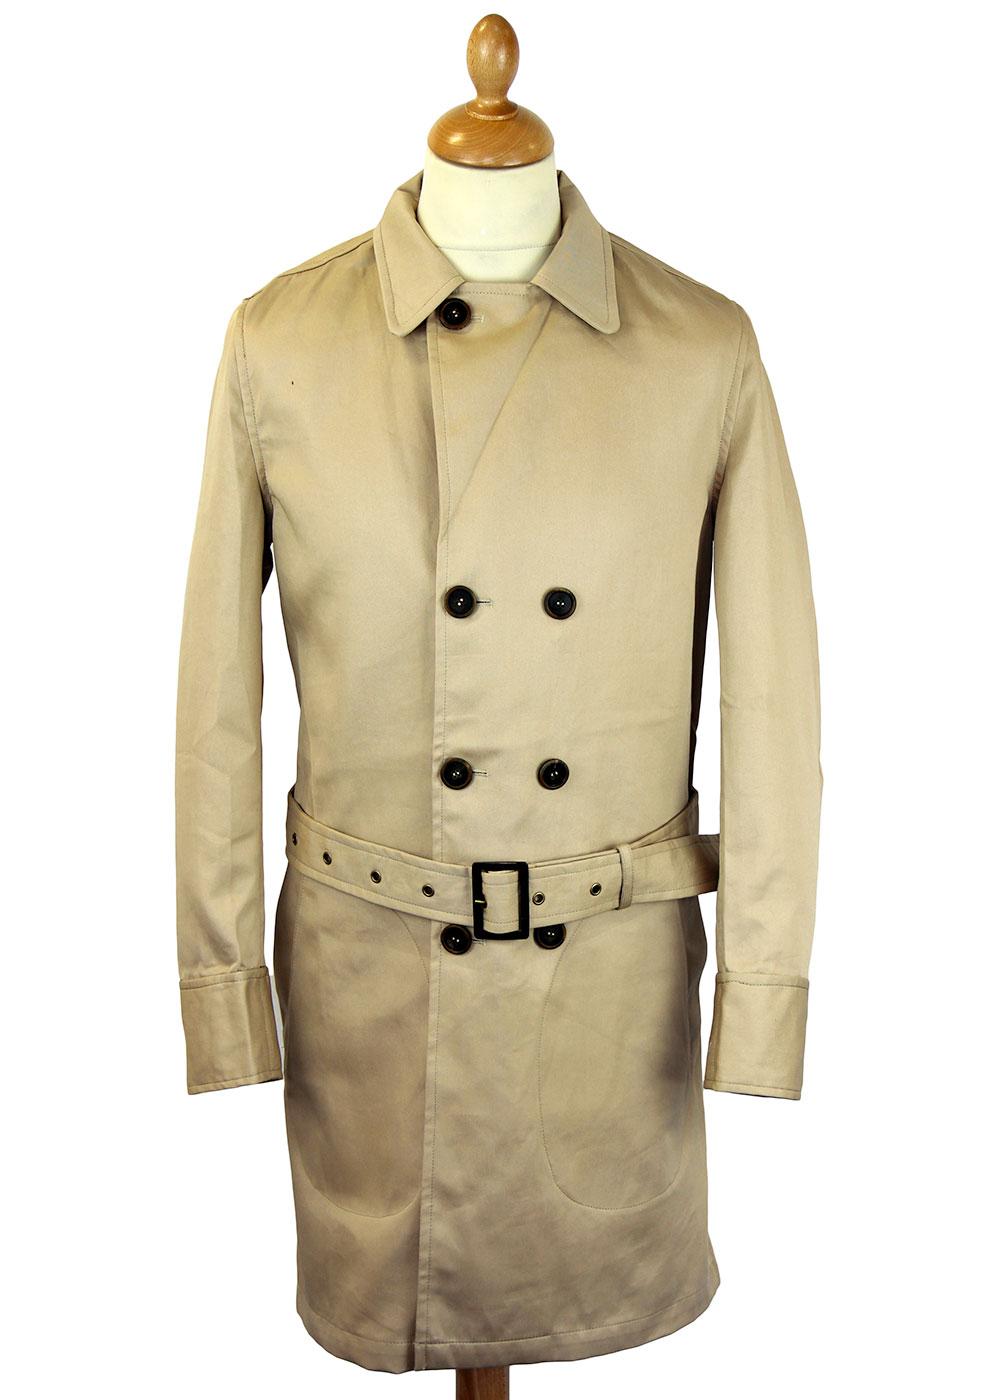 REALM & EMPIRE Retro 60s Mod Belted Officer Trench Coat in Beige